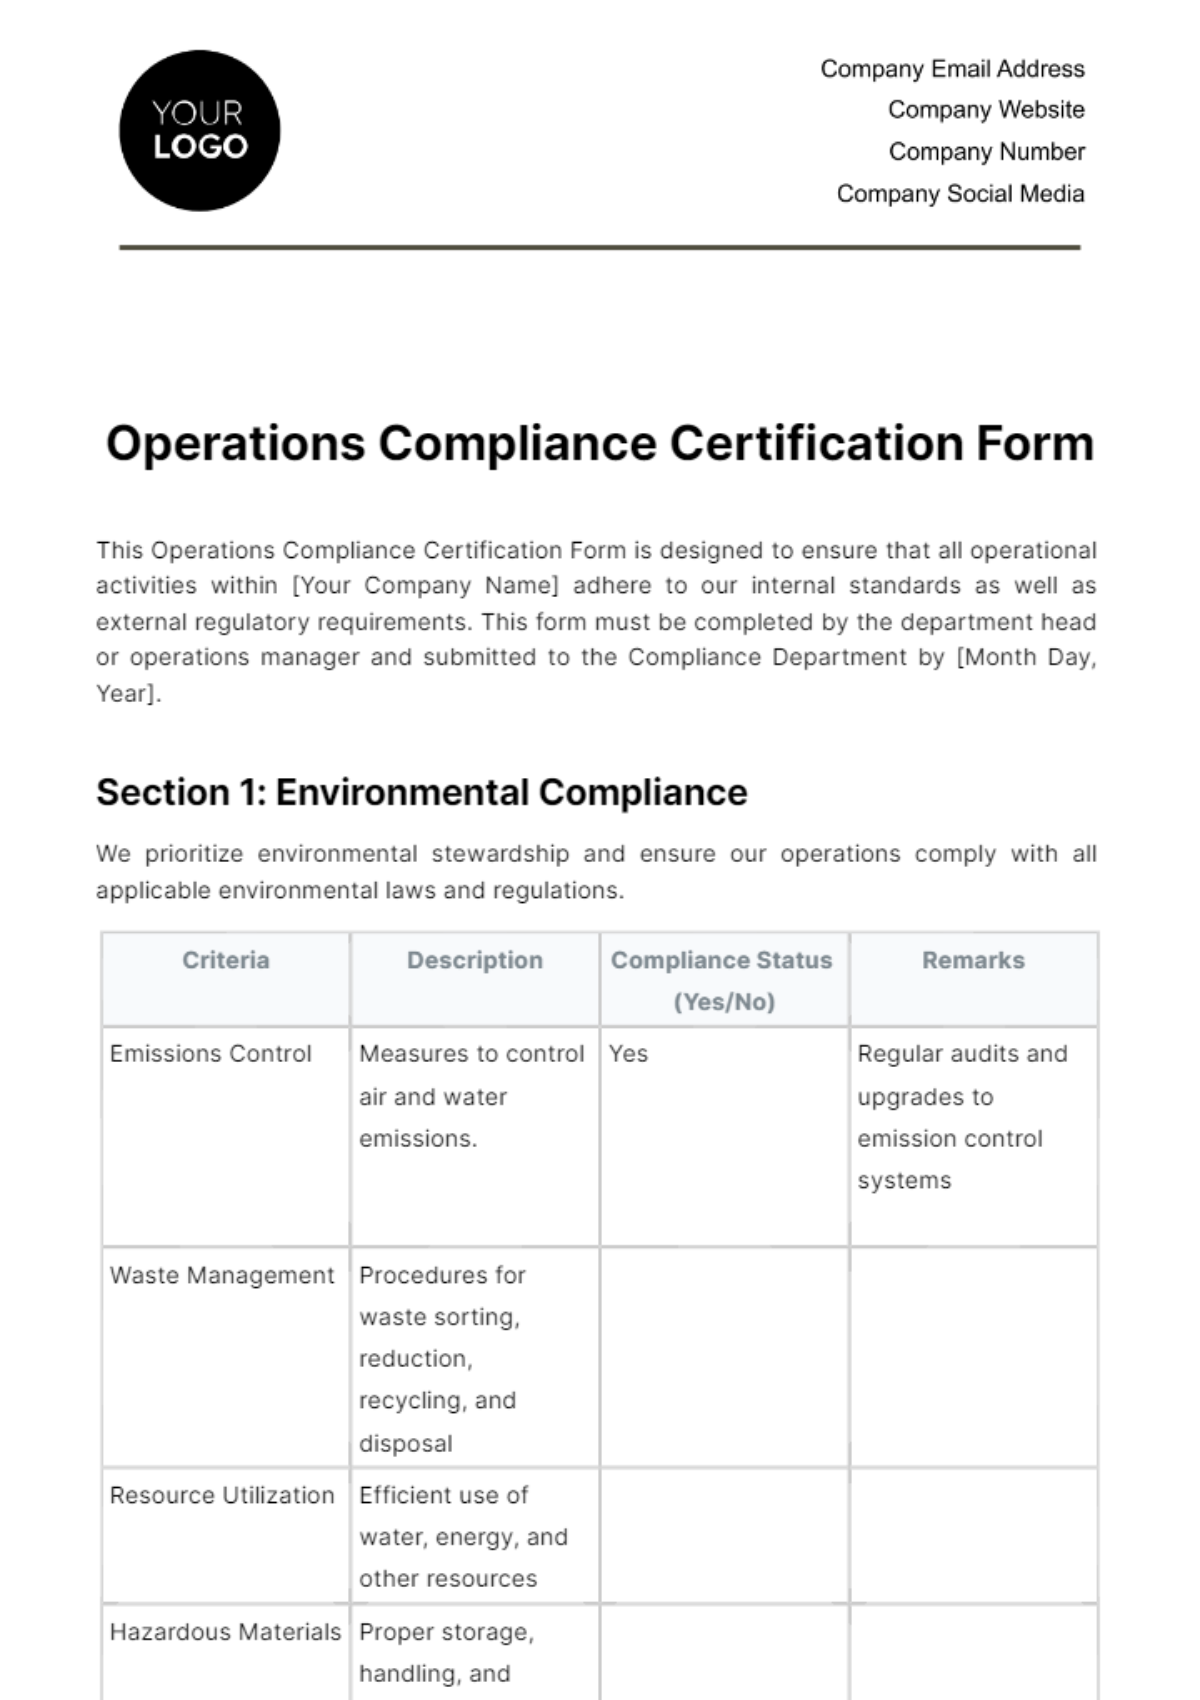 Operations Compliance Certification Form Template